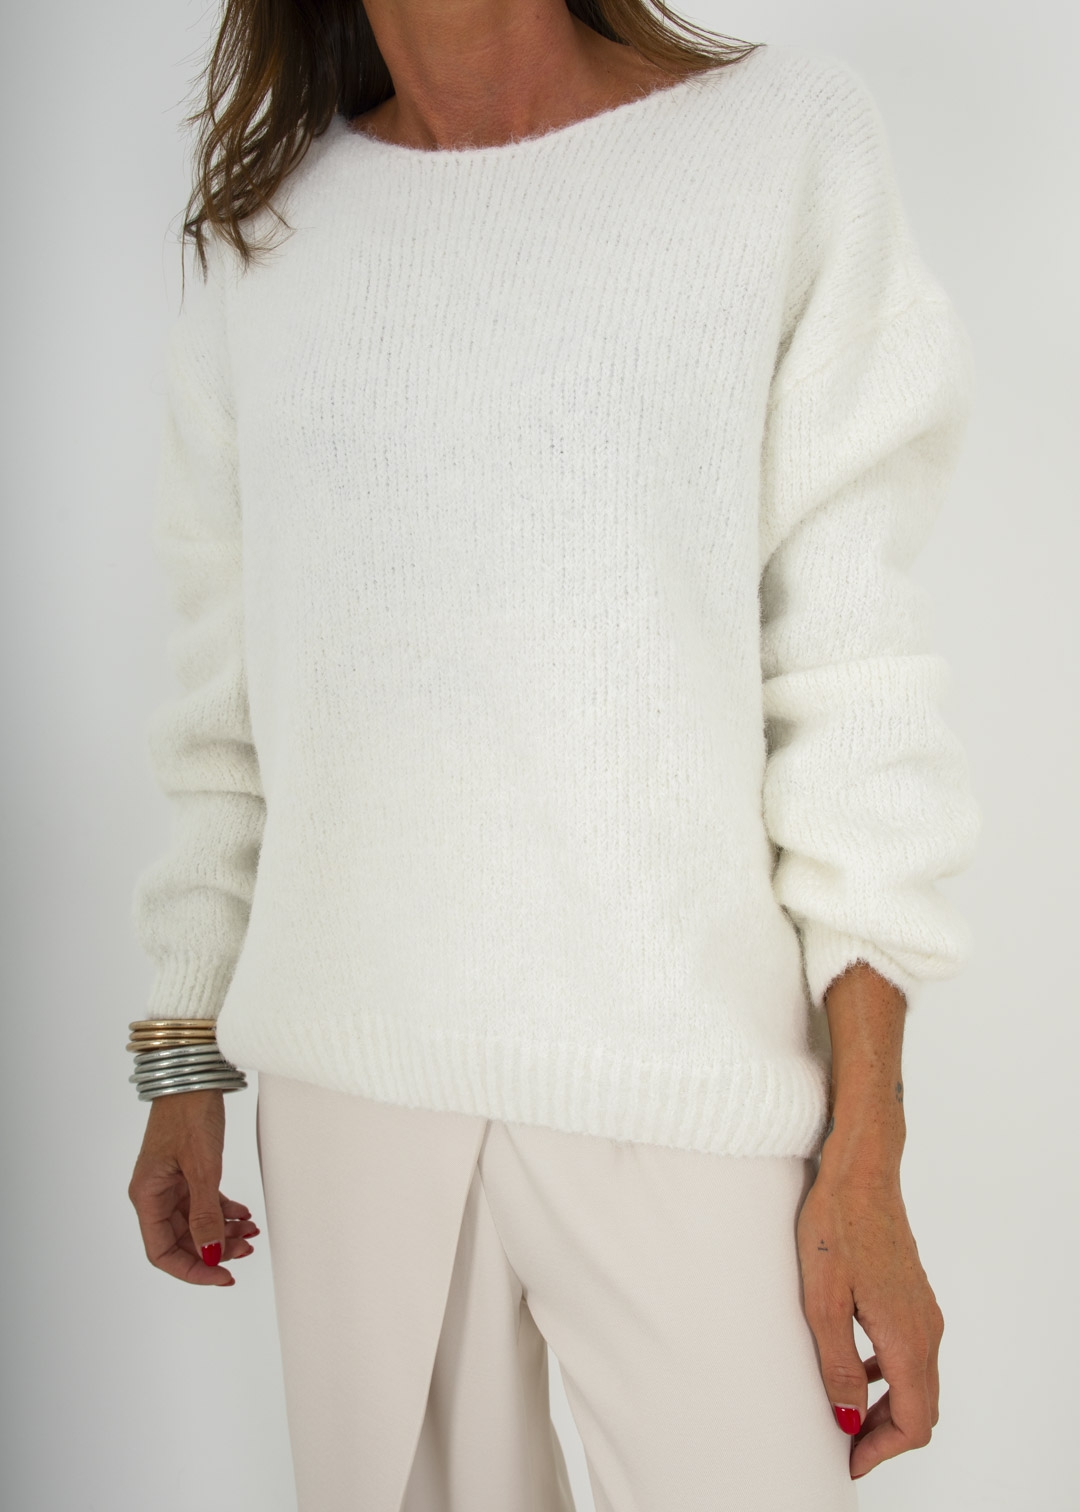 WHITE SWEATER WITH BOWS